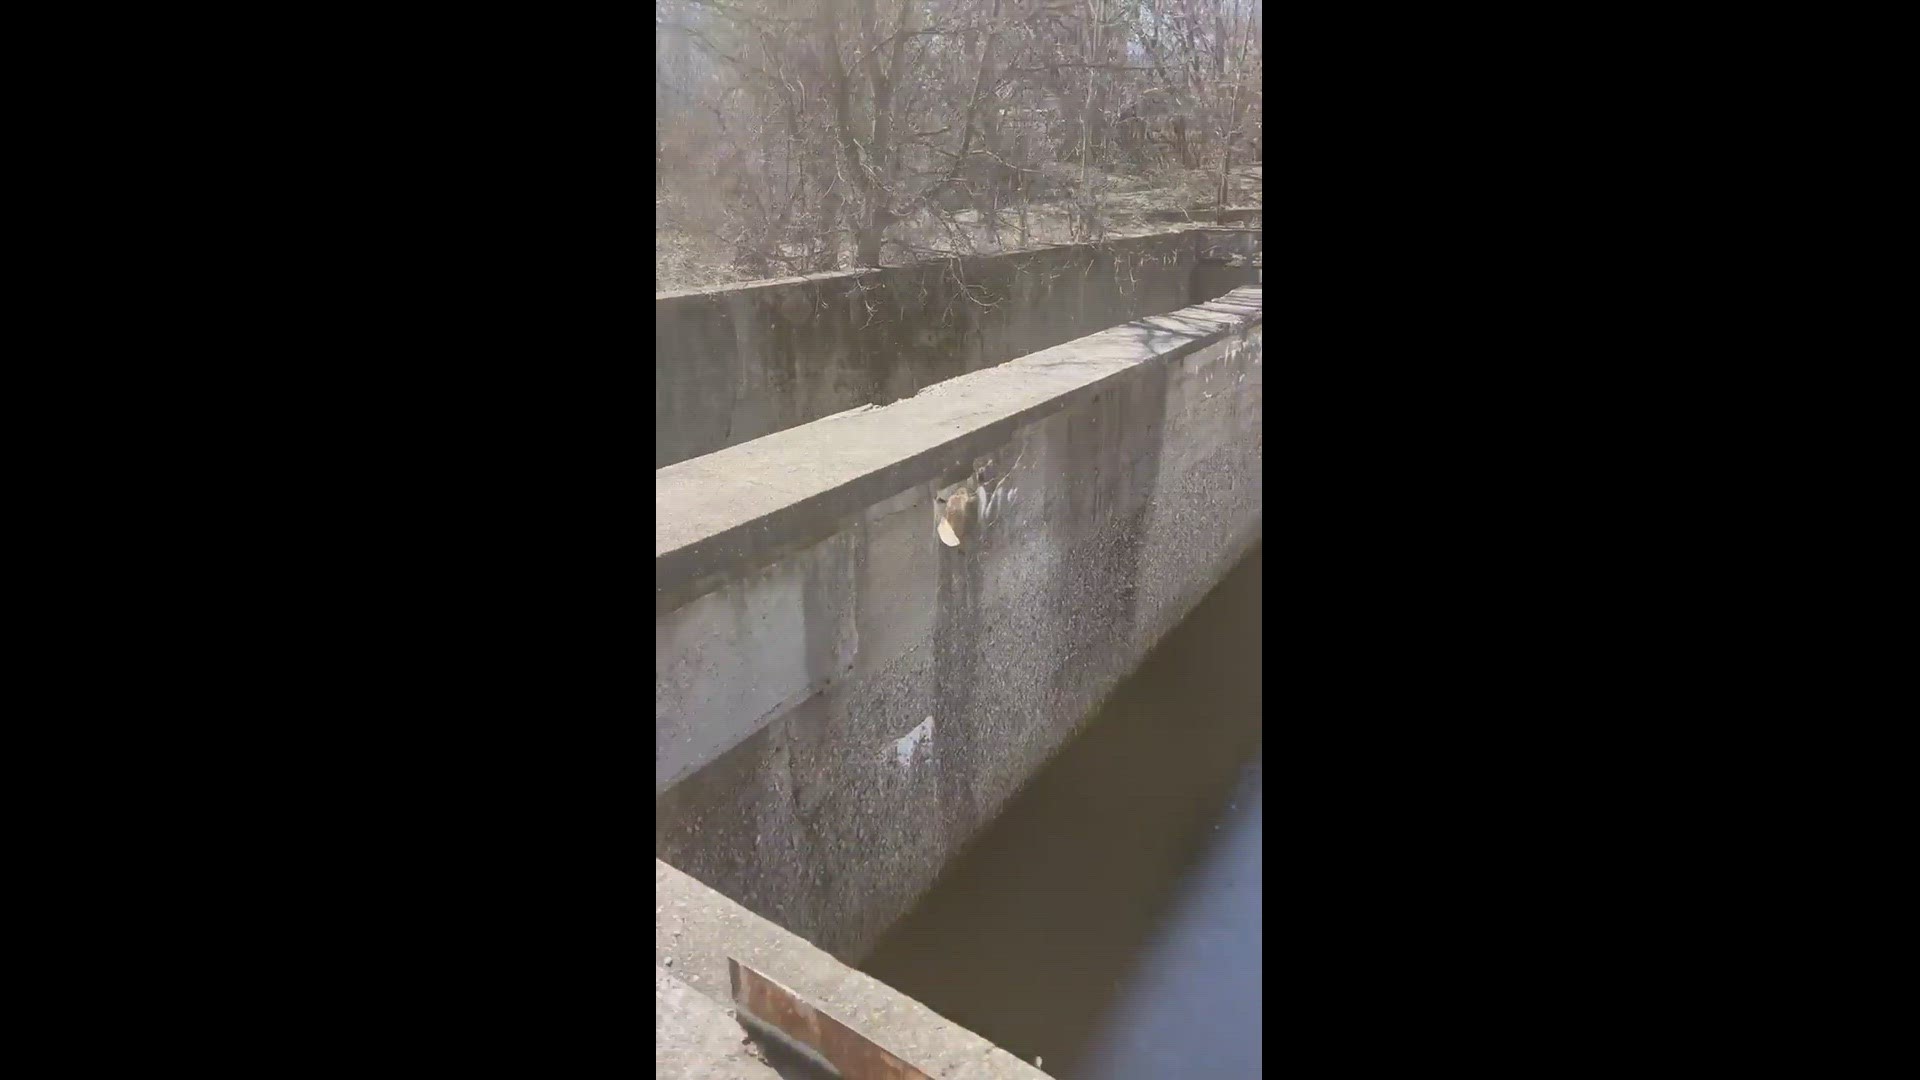 Muskegon Heights firefighters helped pull a dog trapped in an old filtration pond to safety.